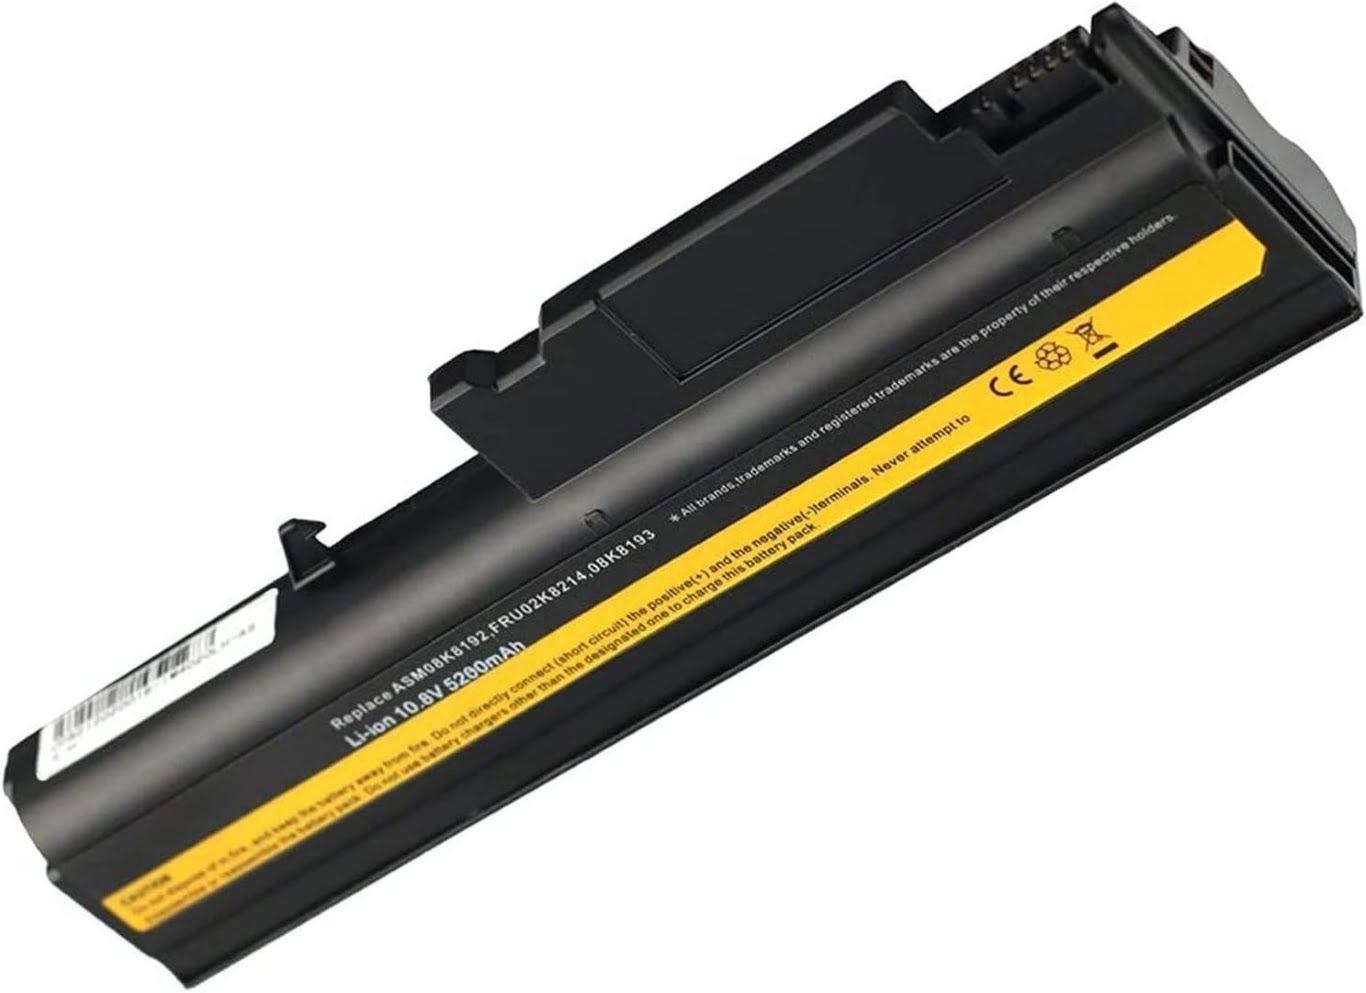 Ibm 08k8194, 92p1088 Laptop Battery For Thinkpad R50, Thinkpad R50e replacement